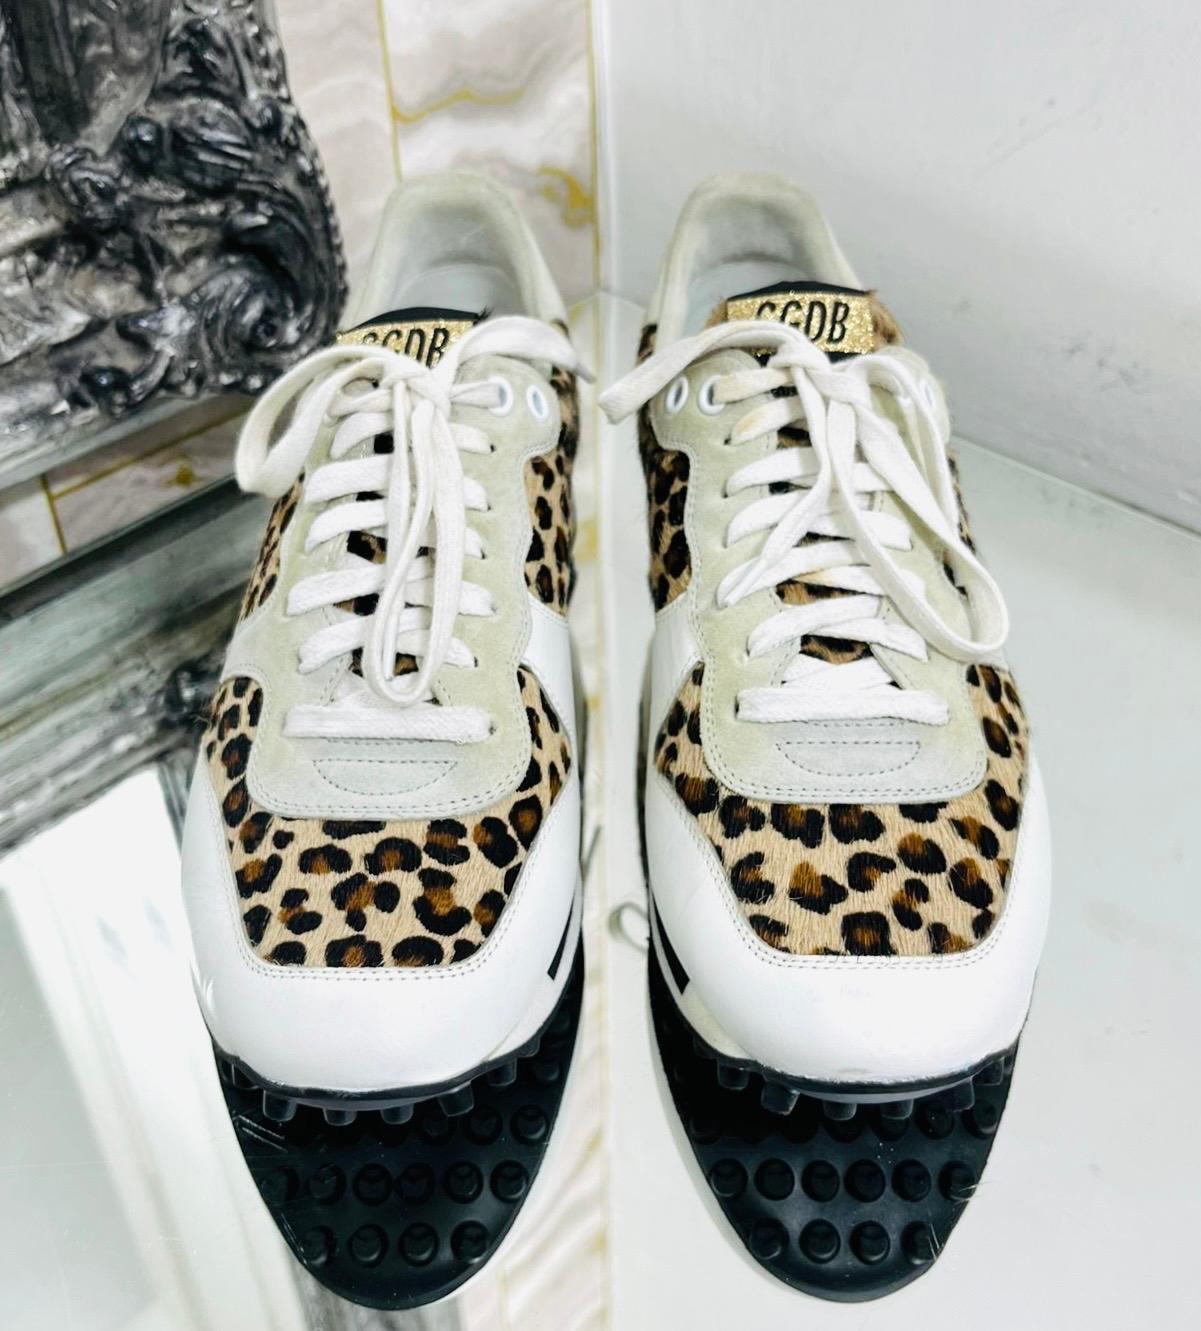 Golden Goose Starland Calf Hair, Suede & Leather Sneakers

White trainers designed with leopard print calf hair inserts.

Featuring light grey suede eye stays and black pebbled soles. 

Detailed with gold 'GGDB' logo to the tongue and suede logo